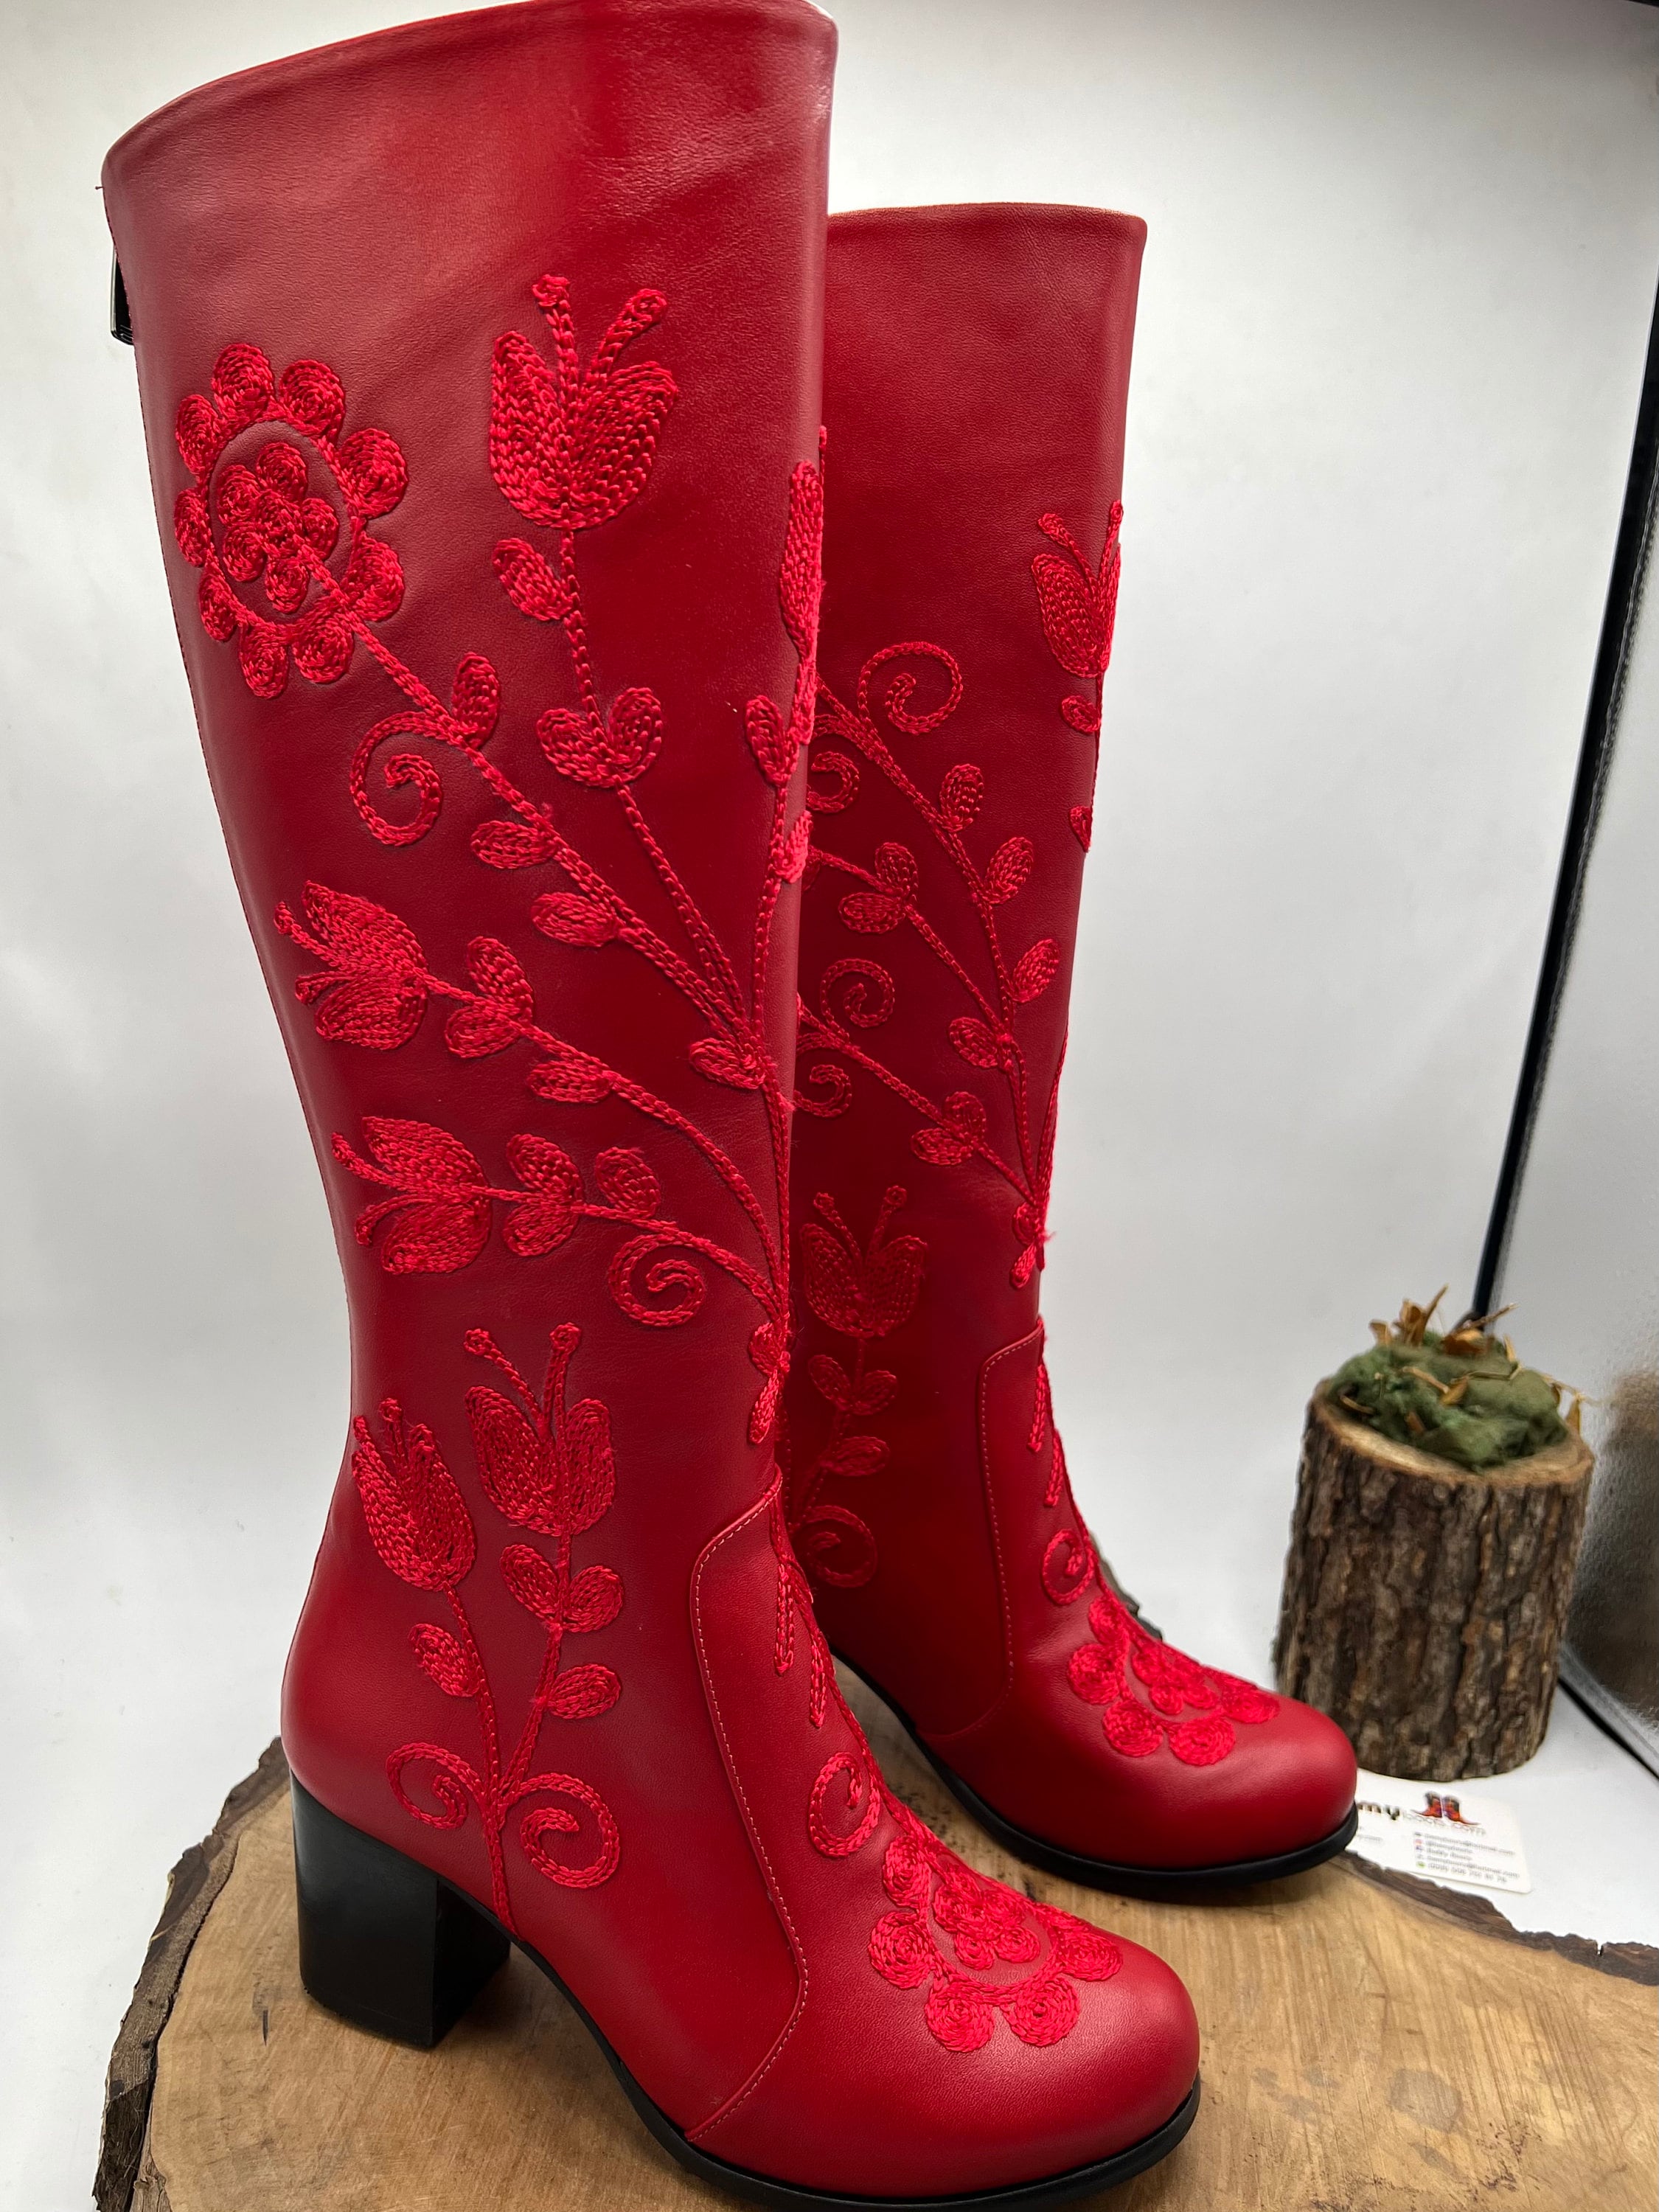 Red Leather Boots Custom Made Suzani Boots Embroidery - Etsy